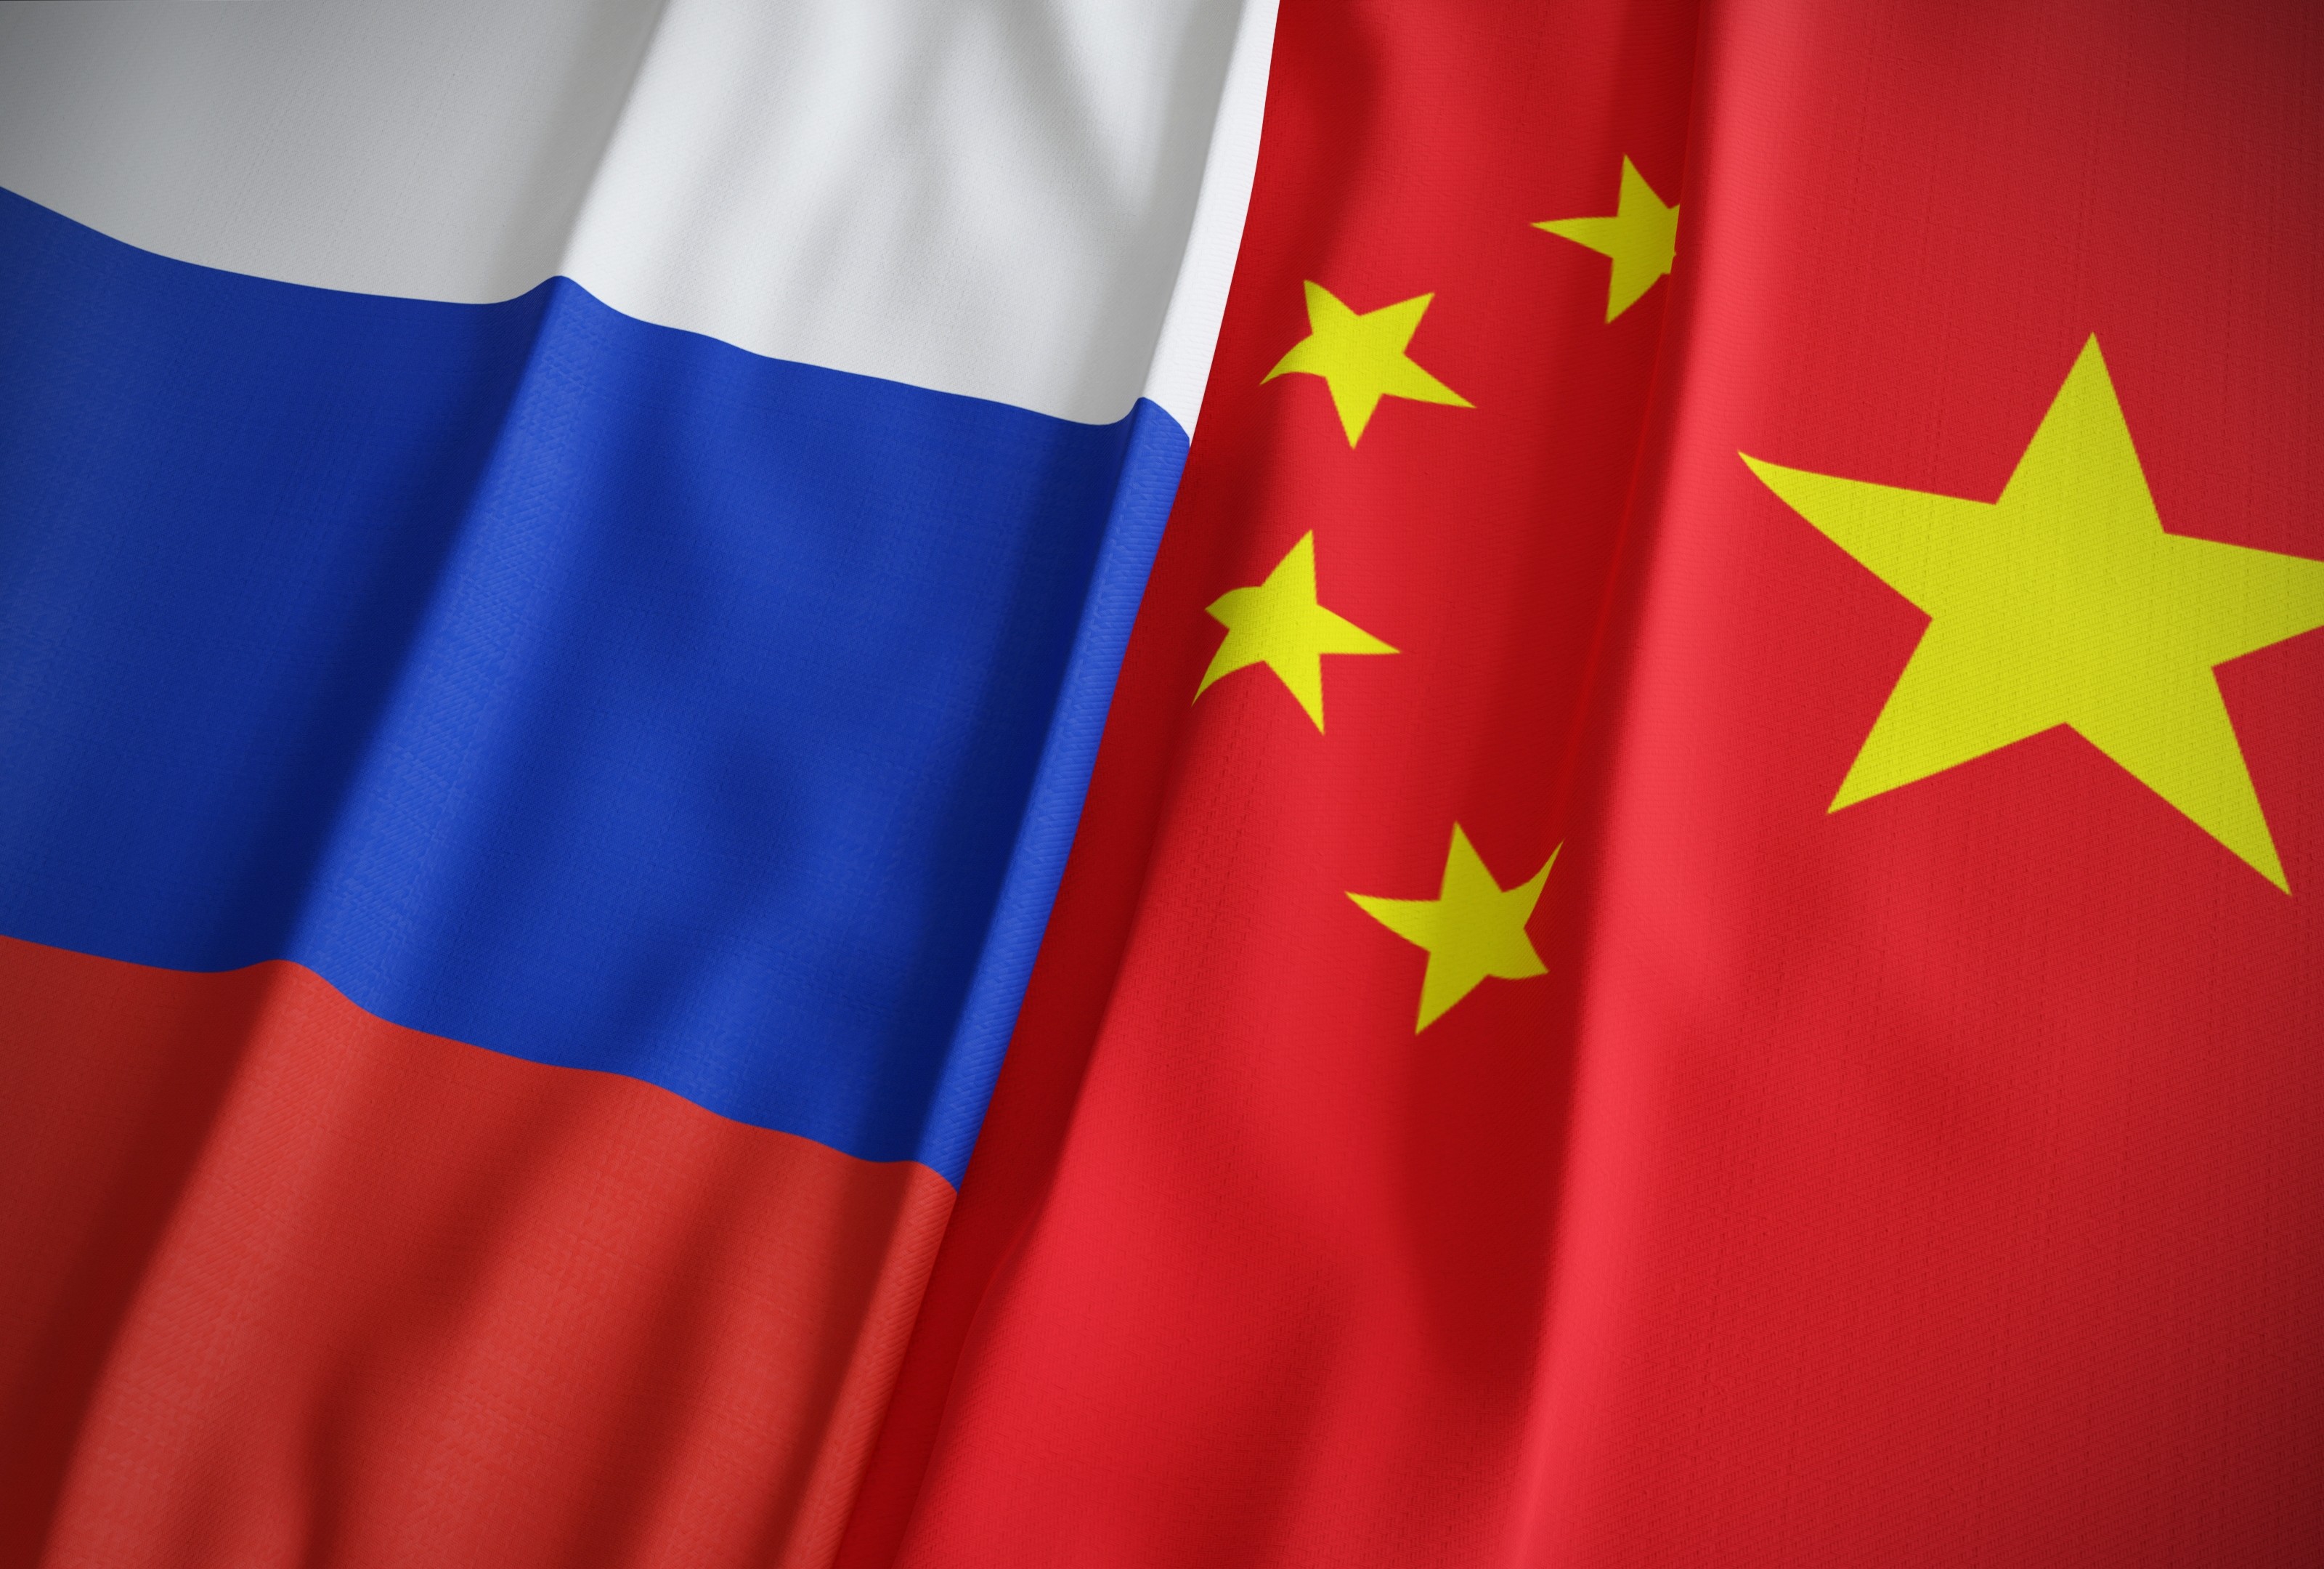 China and Russia agreed to strengthen cooperation to safeguard their “security interests”. Photo: Shutterstock Images